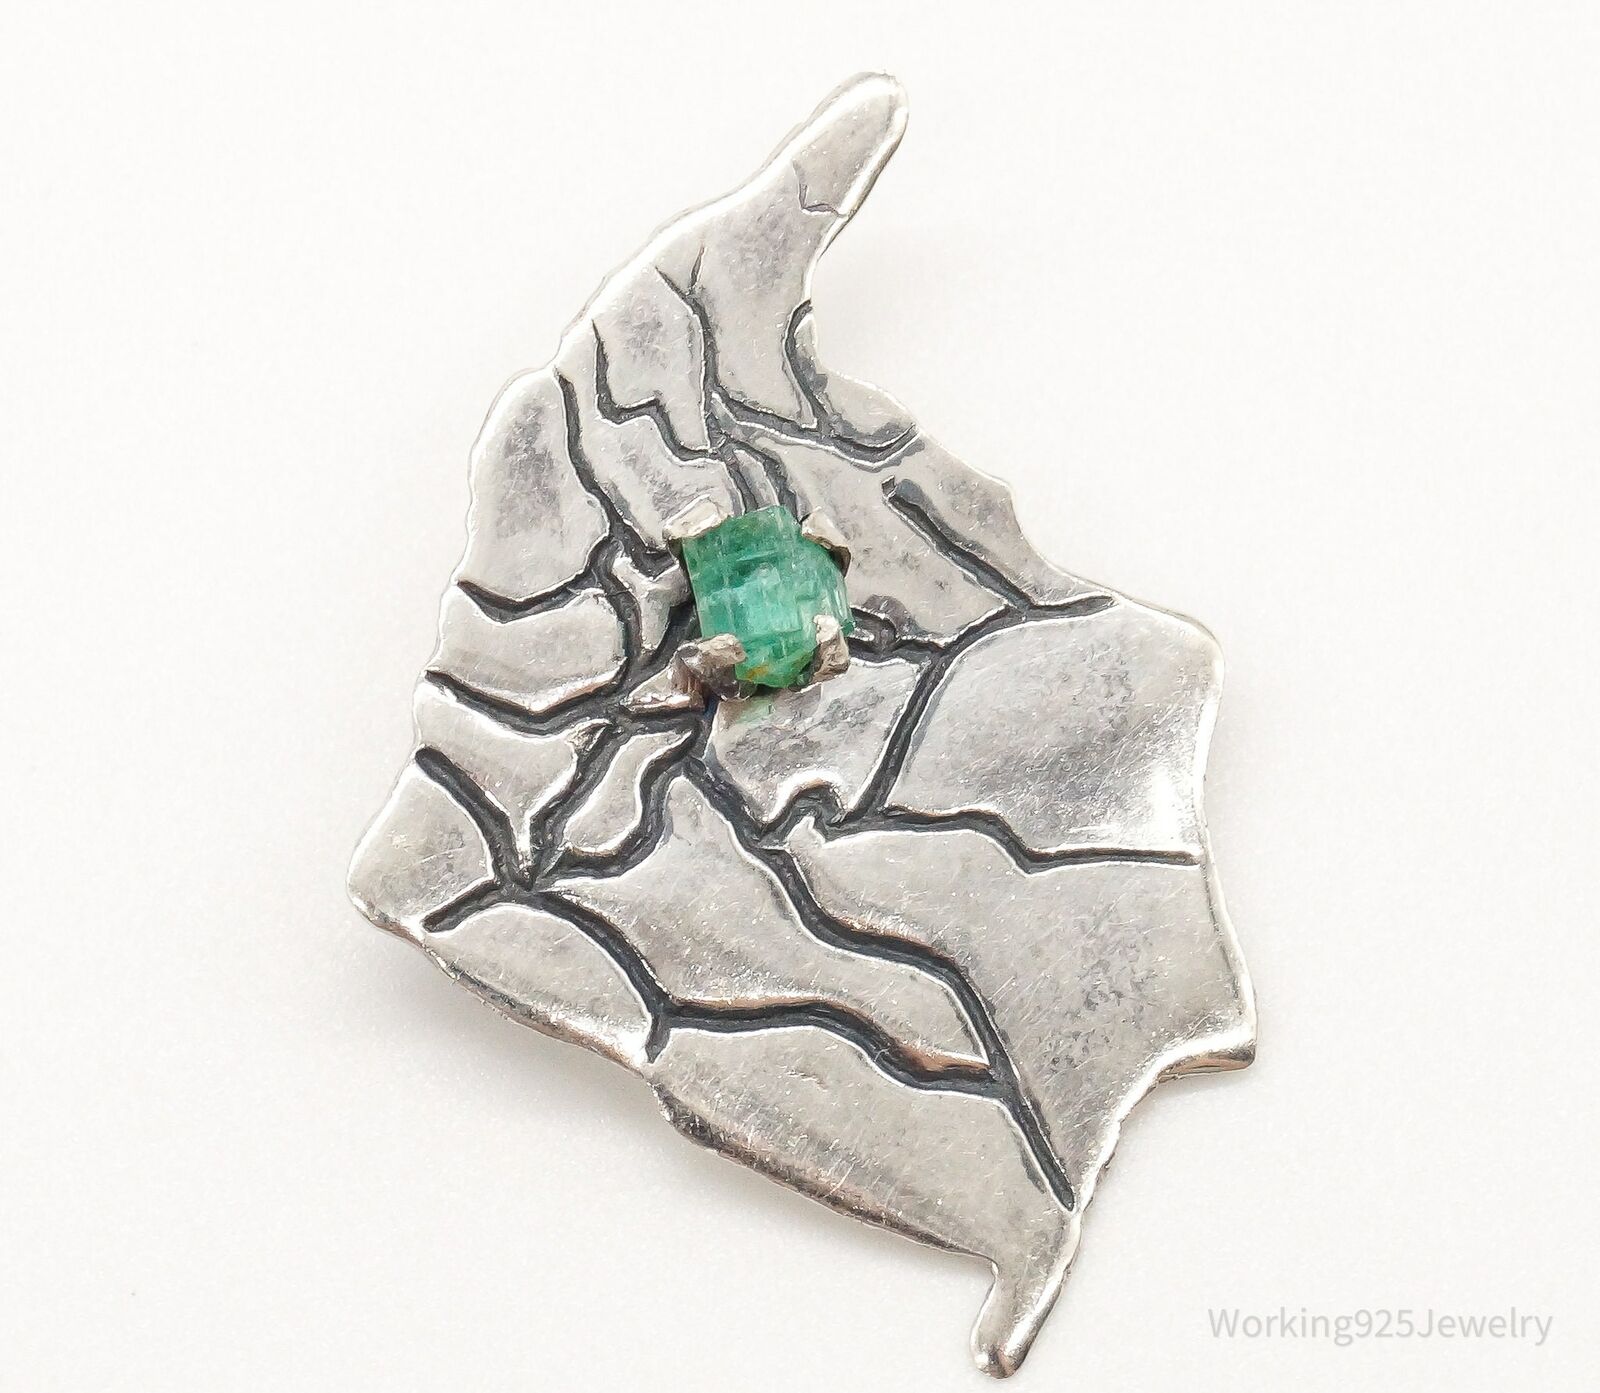 Antique Raw Emerald 900 Silver Brooch Pin - image 3